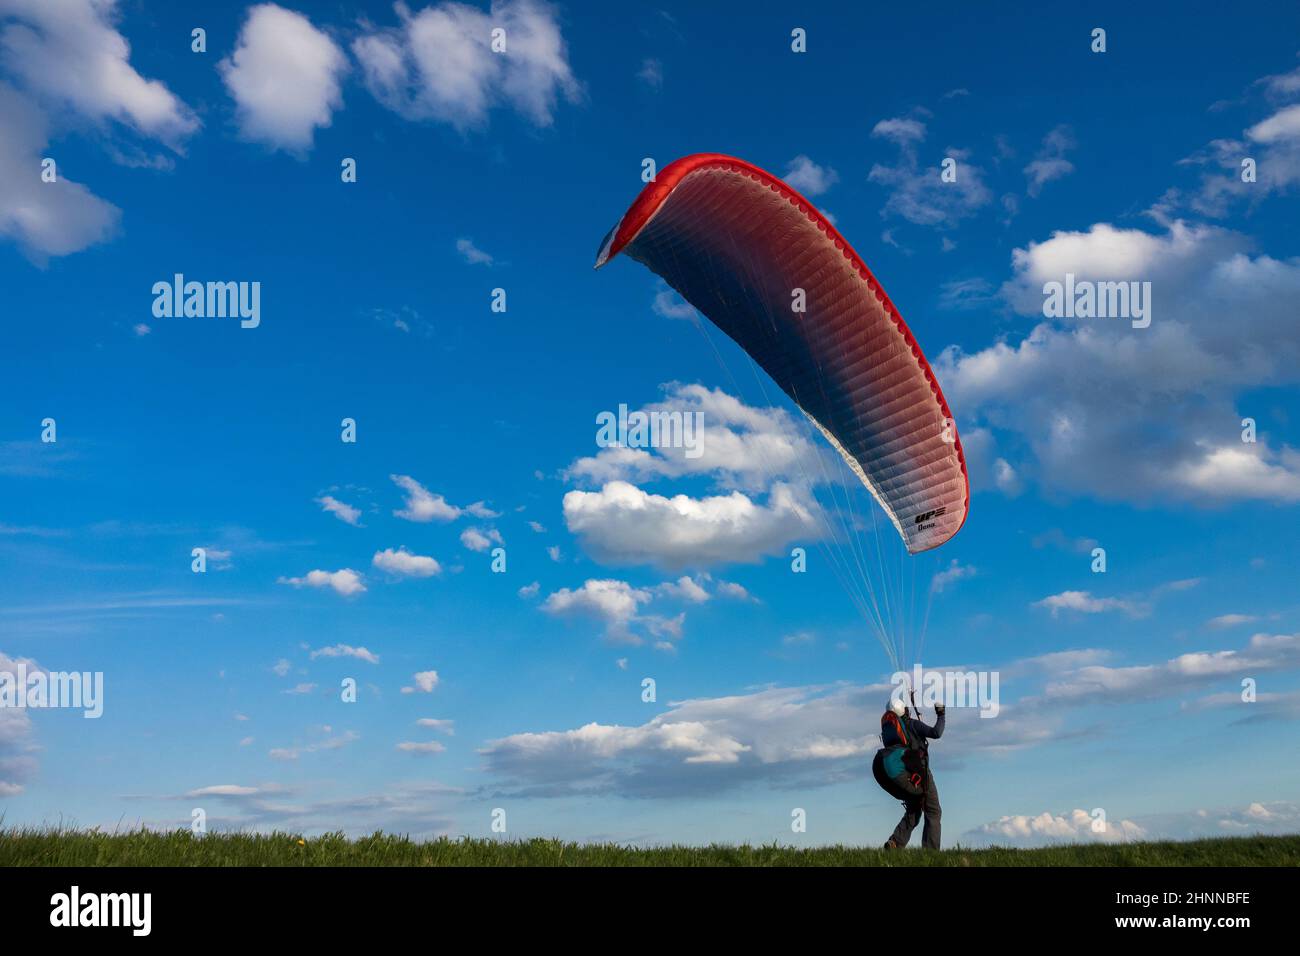 Paraglider inflating wing Stock Photo